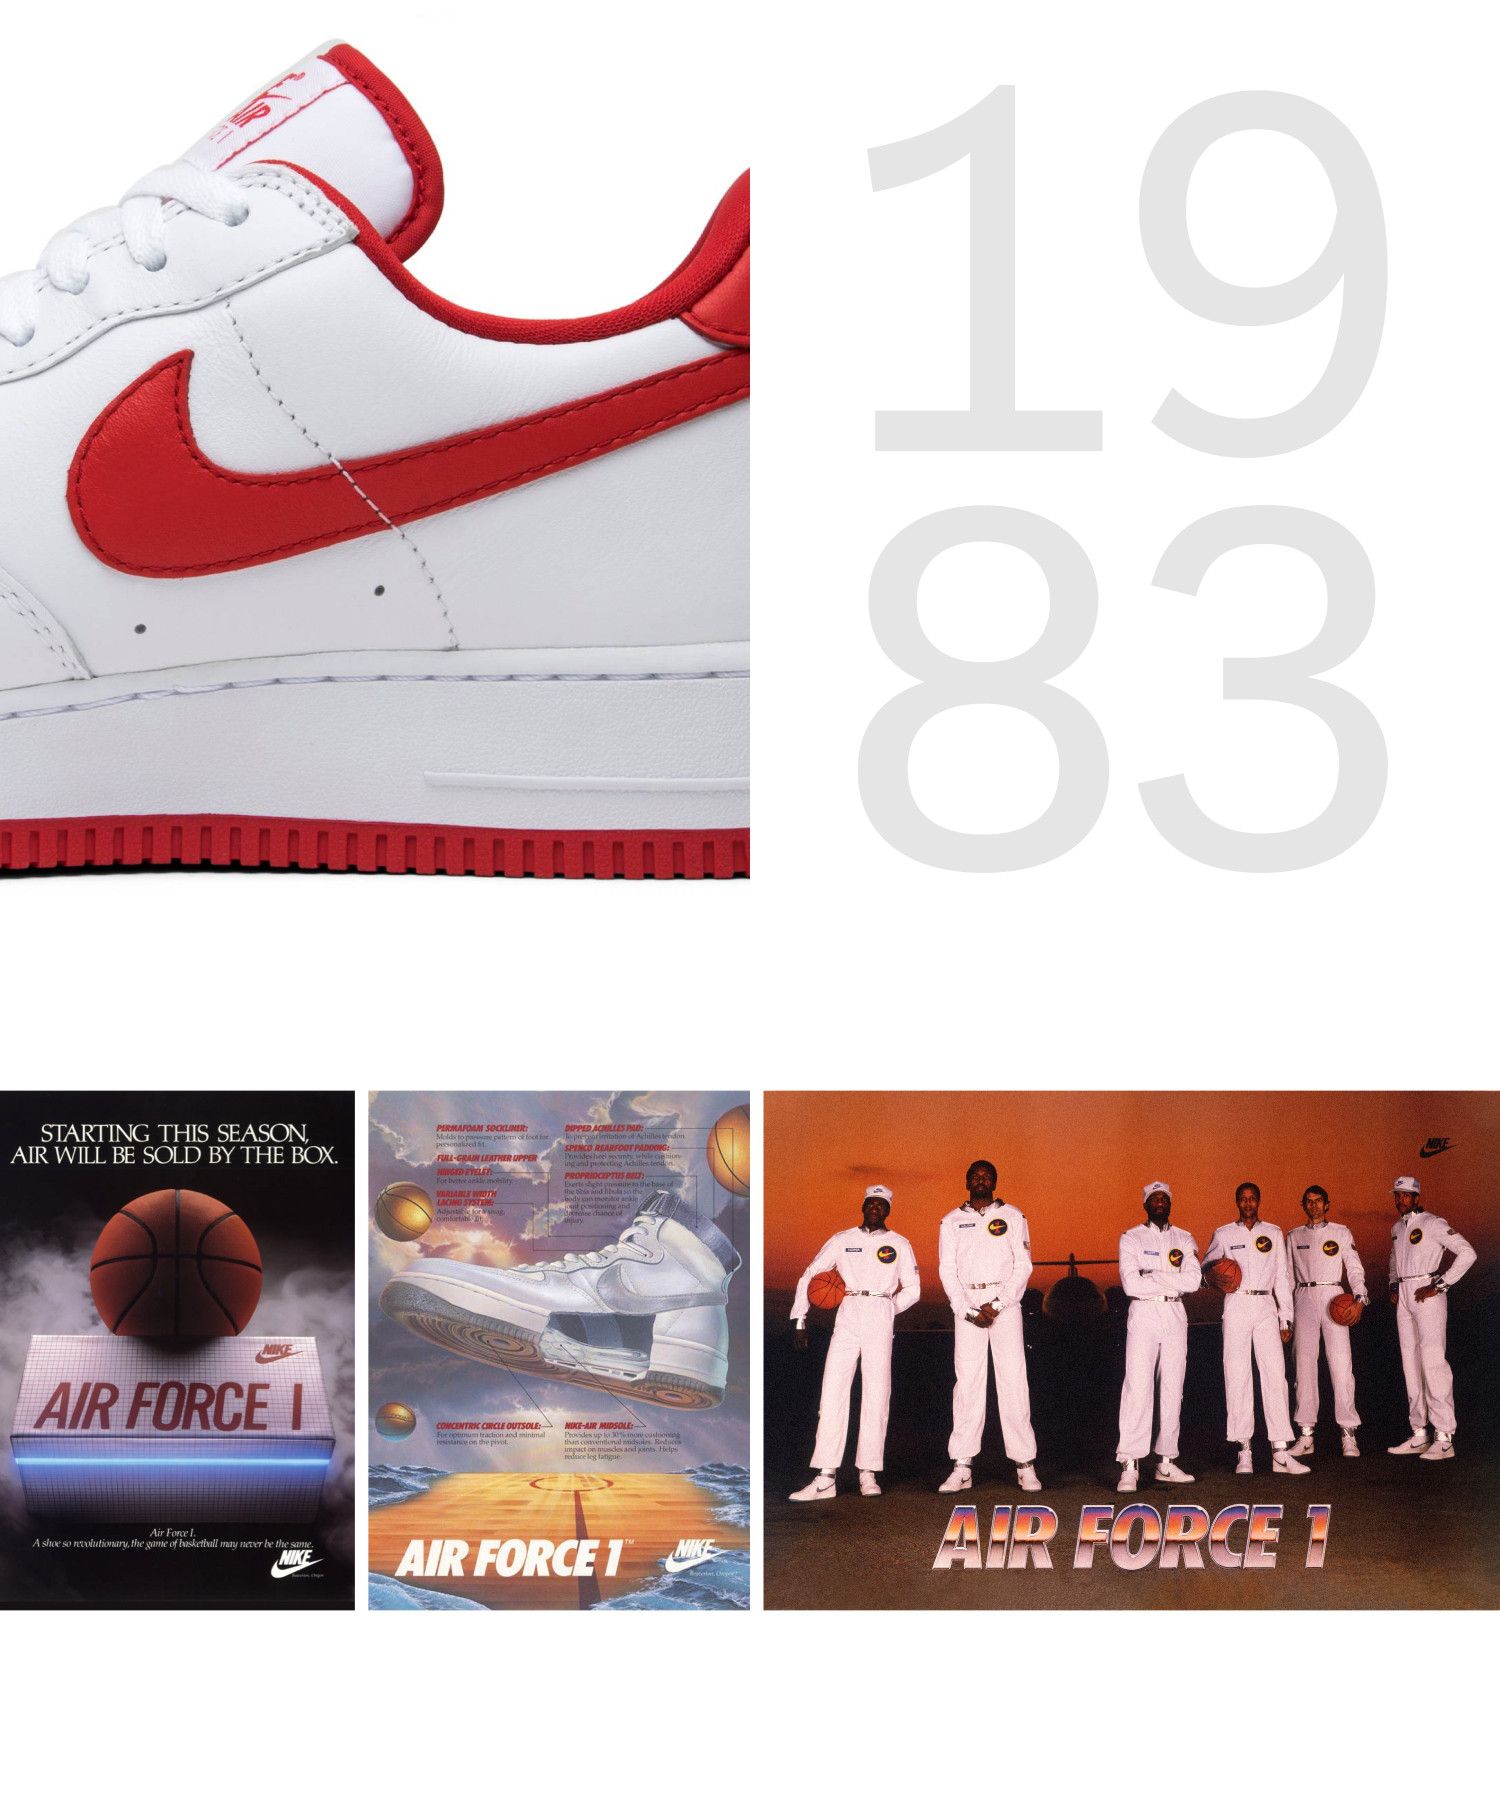 The History of the Nike Air Force 1, Sneakers, Sports Memorabilia & Modern  Collectibles